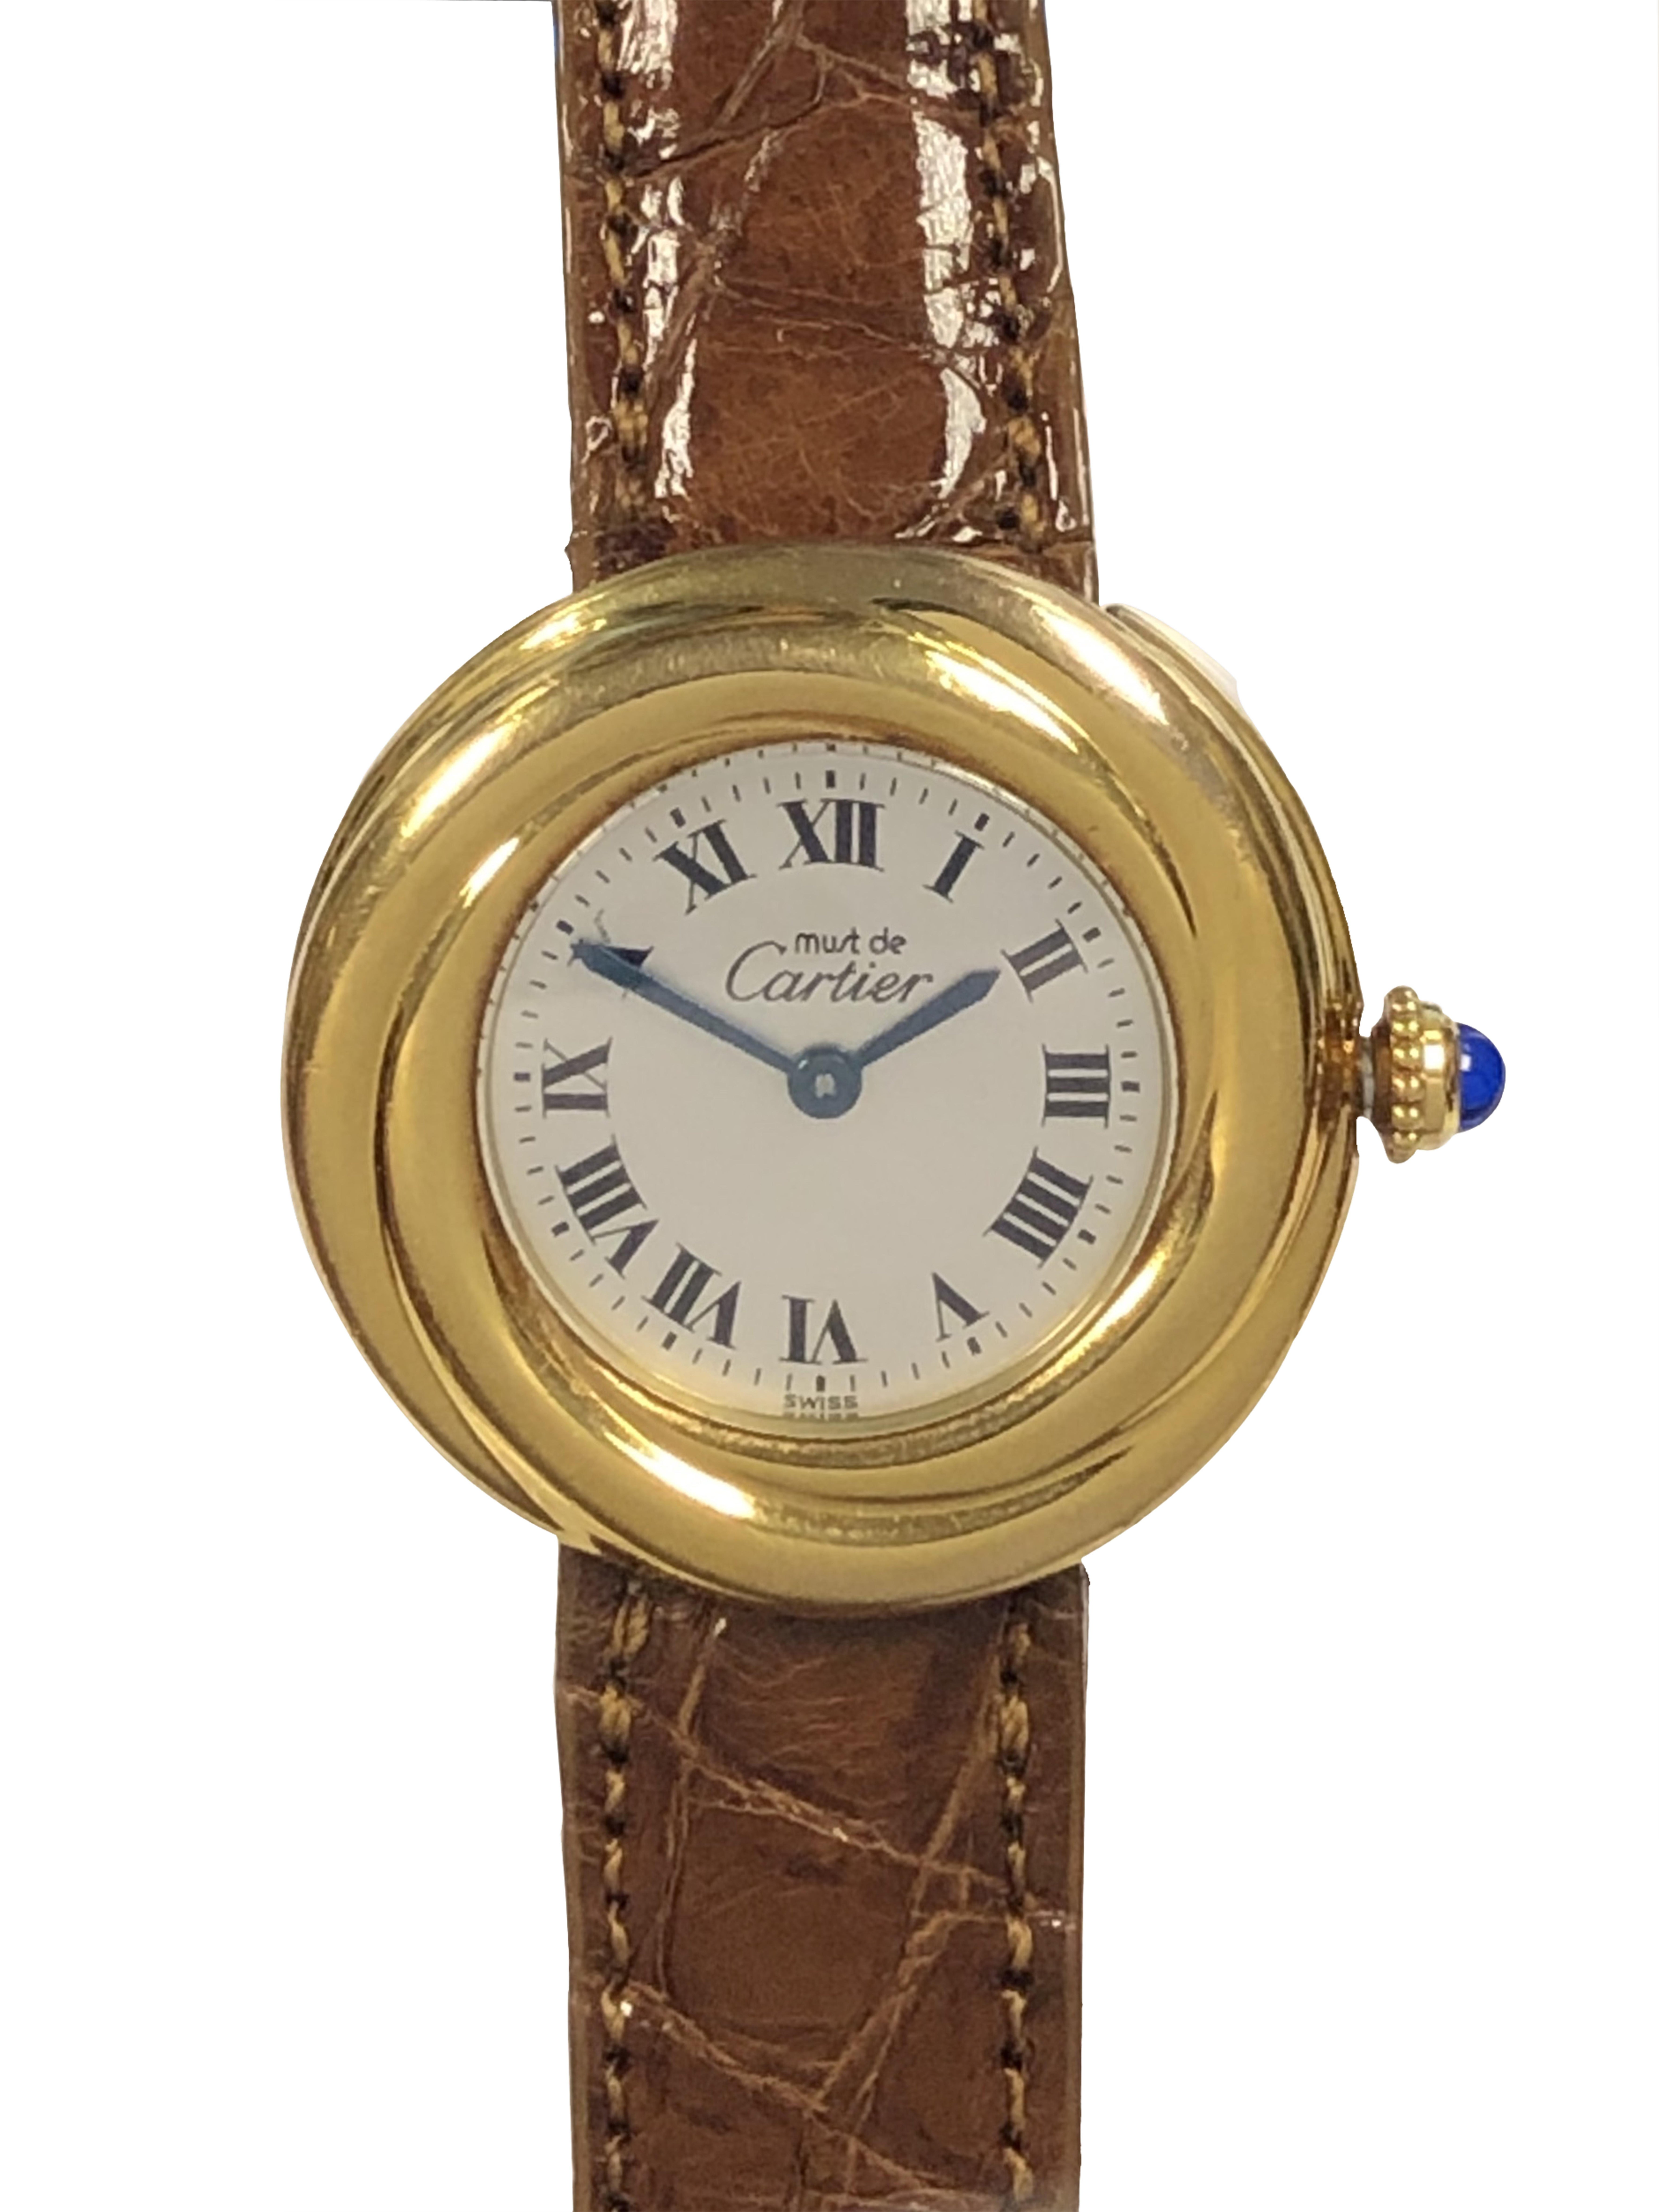 Circa 2000 Cartier Trinity Collection Ladies Wrist Watch, 27 MM Vermeil, Gold Plate on Sterling Silver case. Quartz Movement, Silver Satin dial with Black Roman Numerals, Sapphire crown. New Brown padded Crocodile Strap with Cartier Tang Buckle.